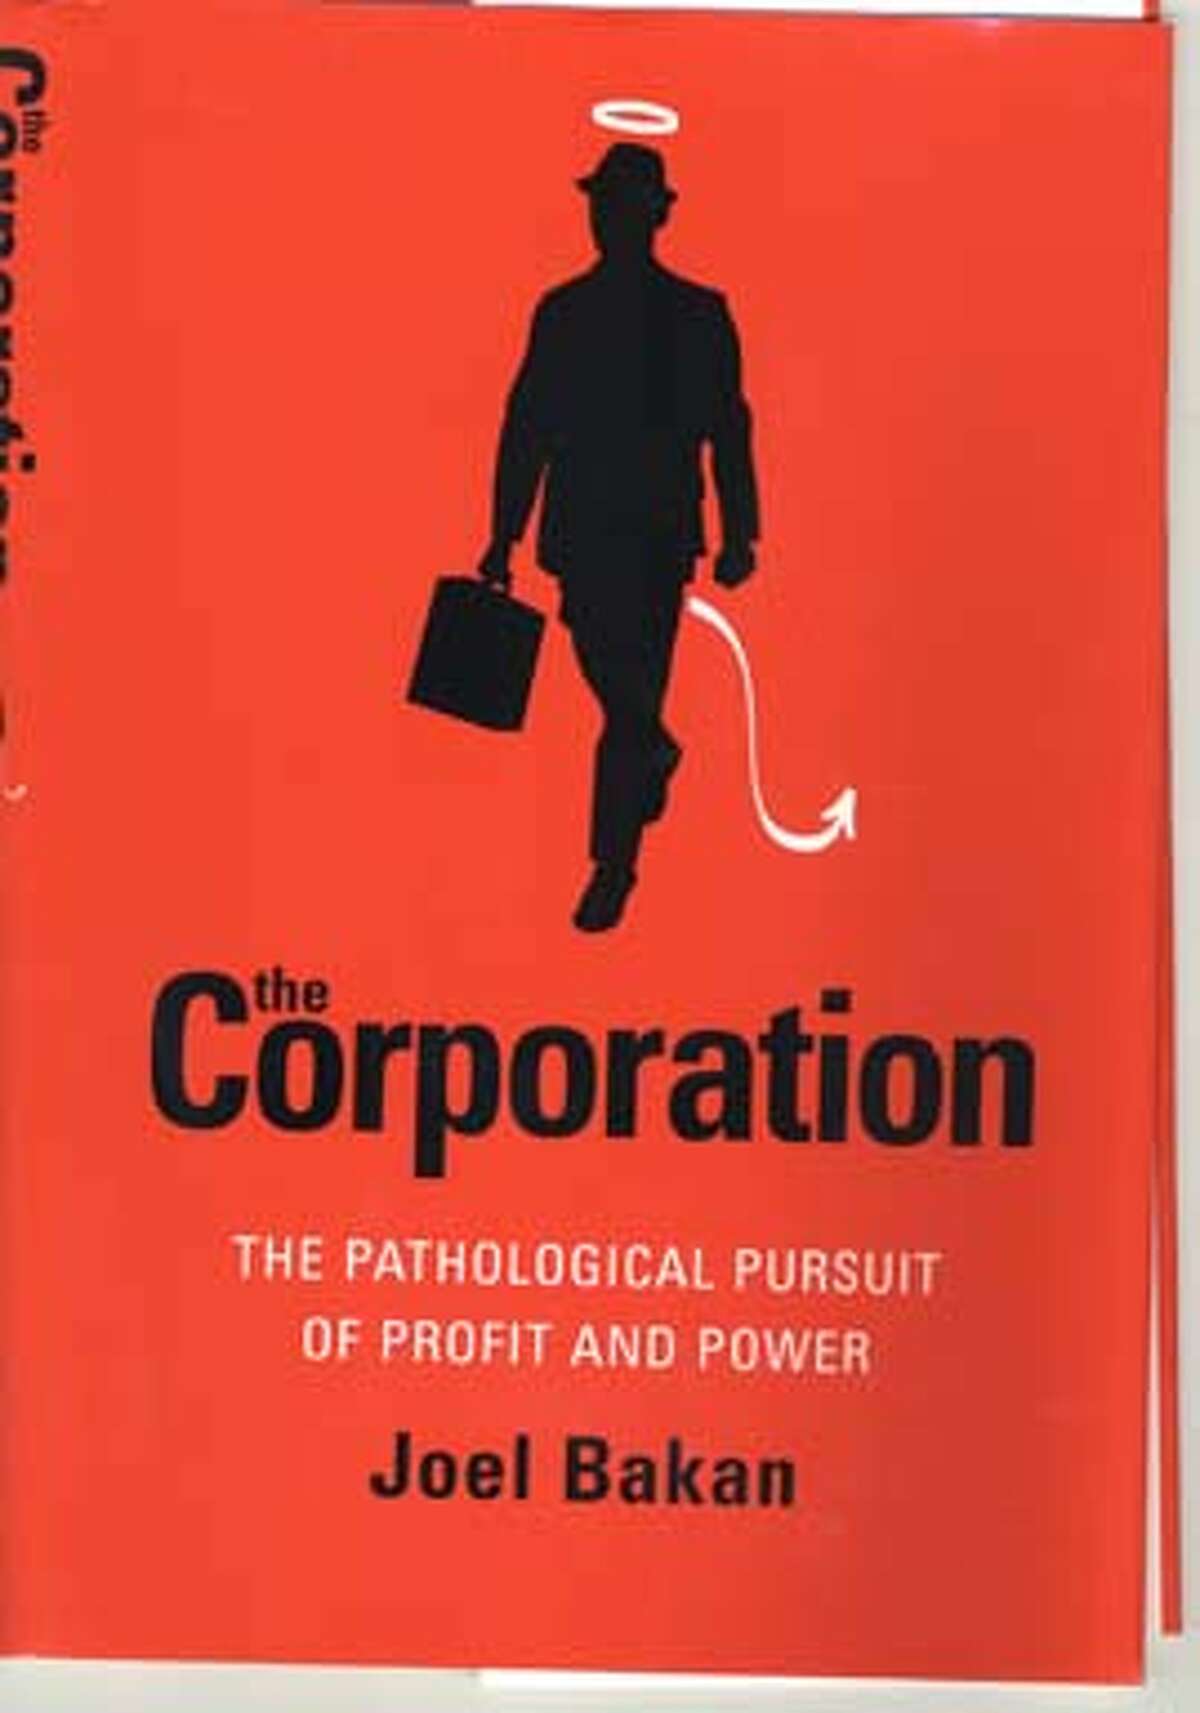 Cover of, "The Corporation" by Joel Bakan.